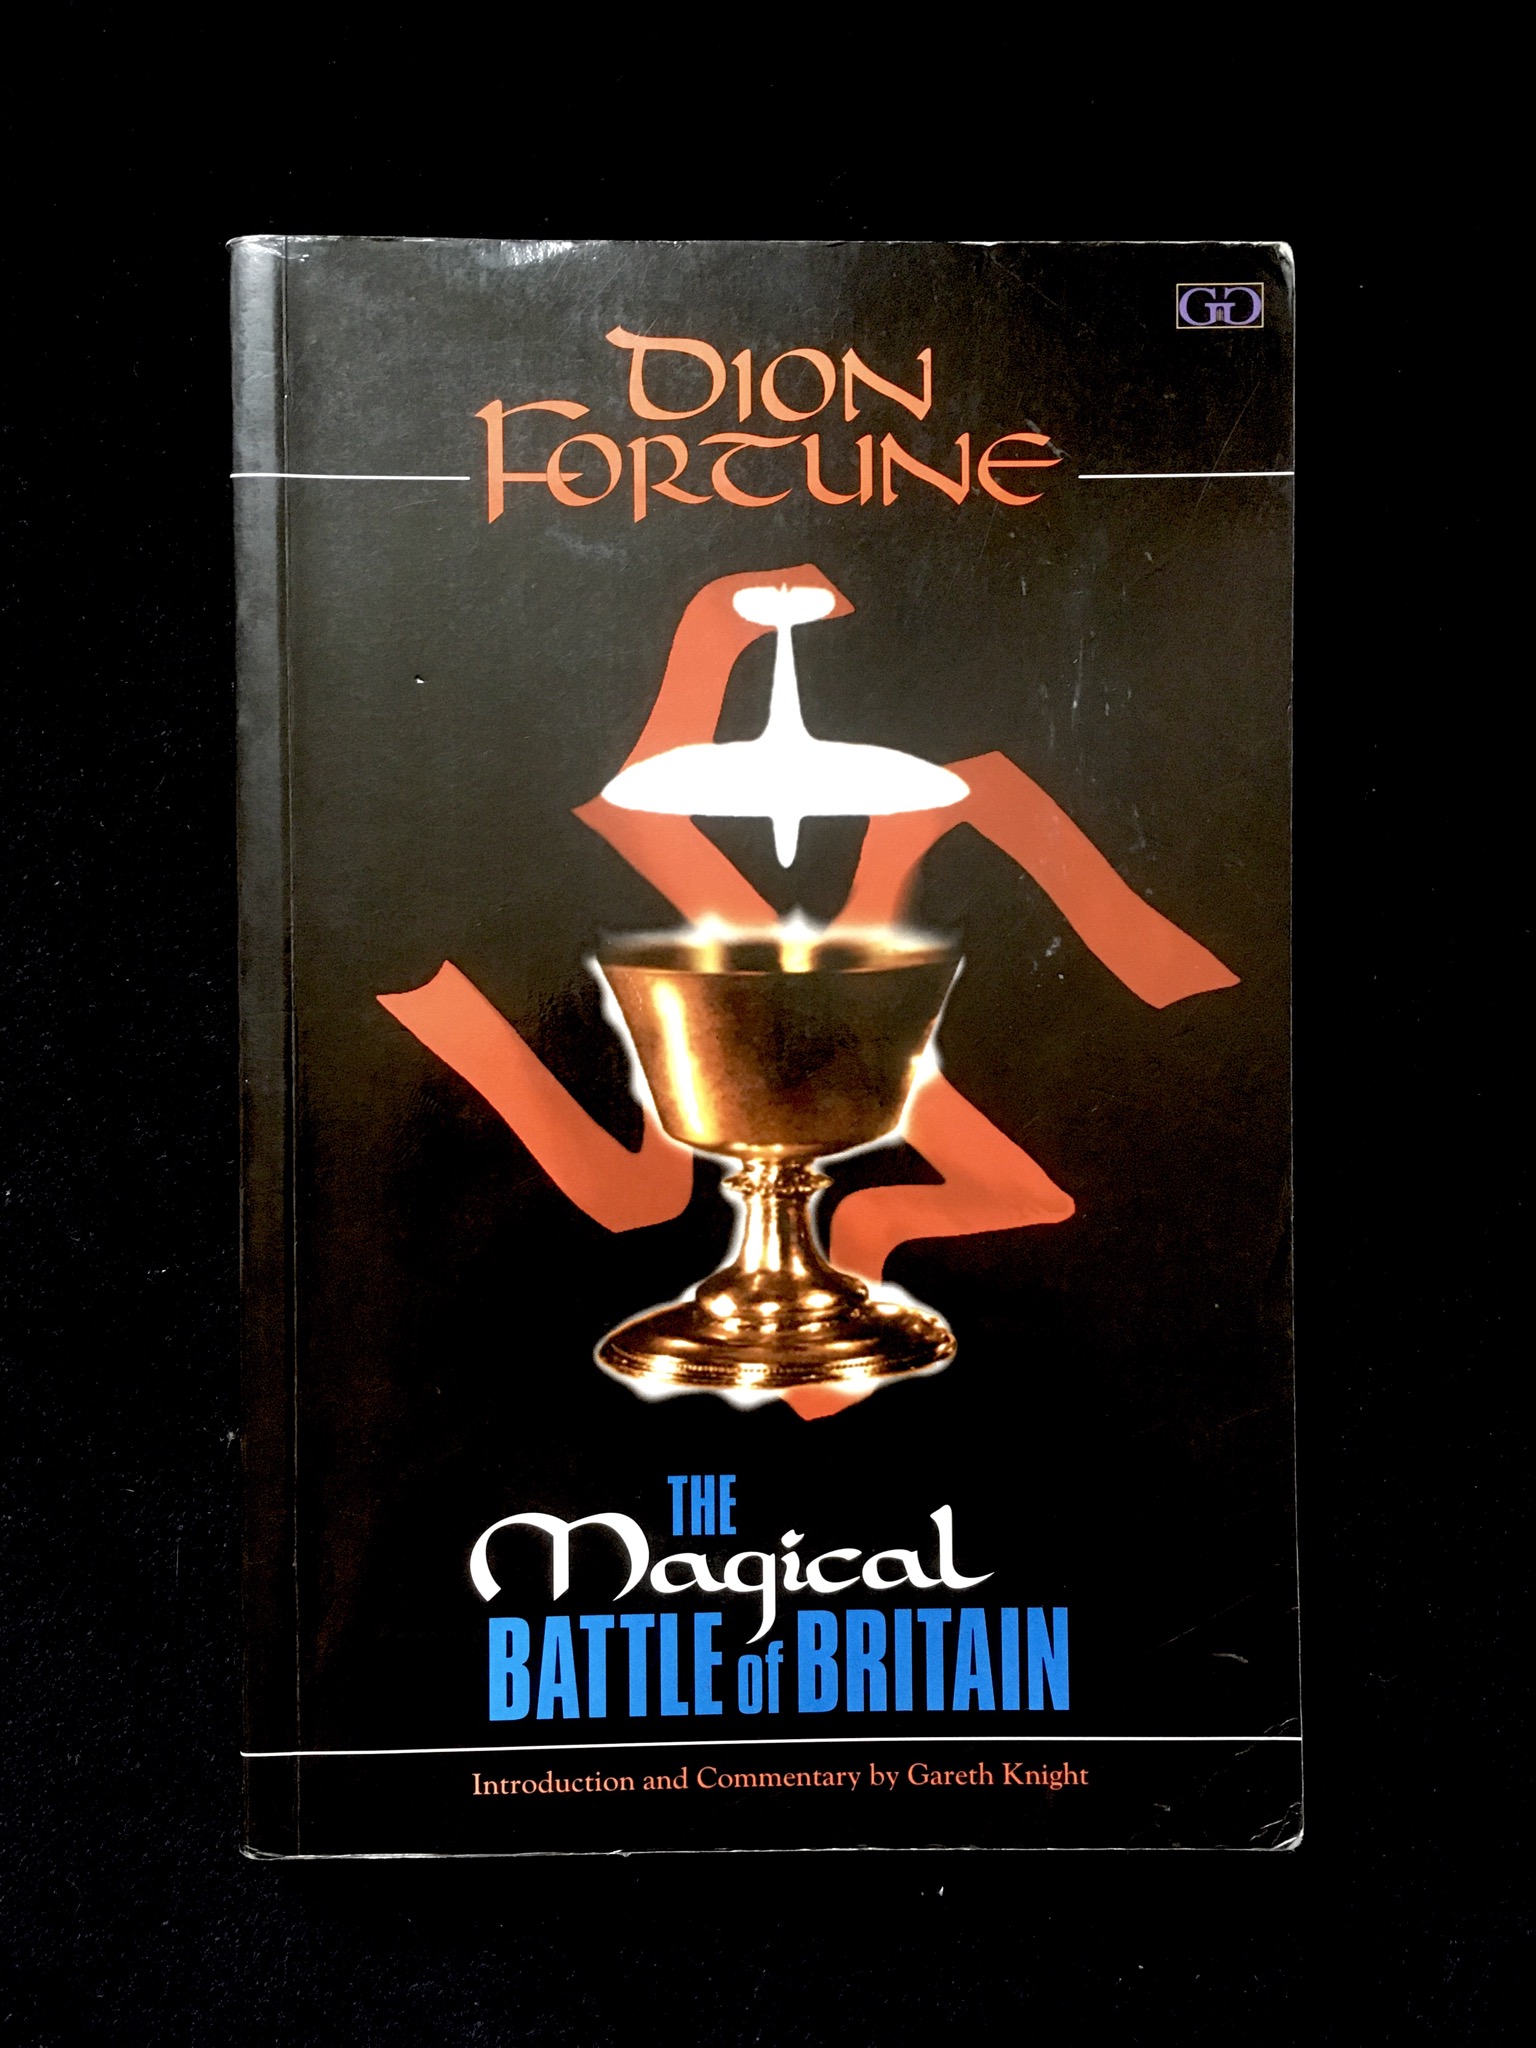 The Magical Battle of Britain by Dion Fortune